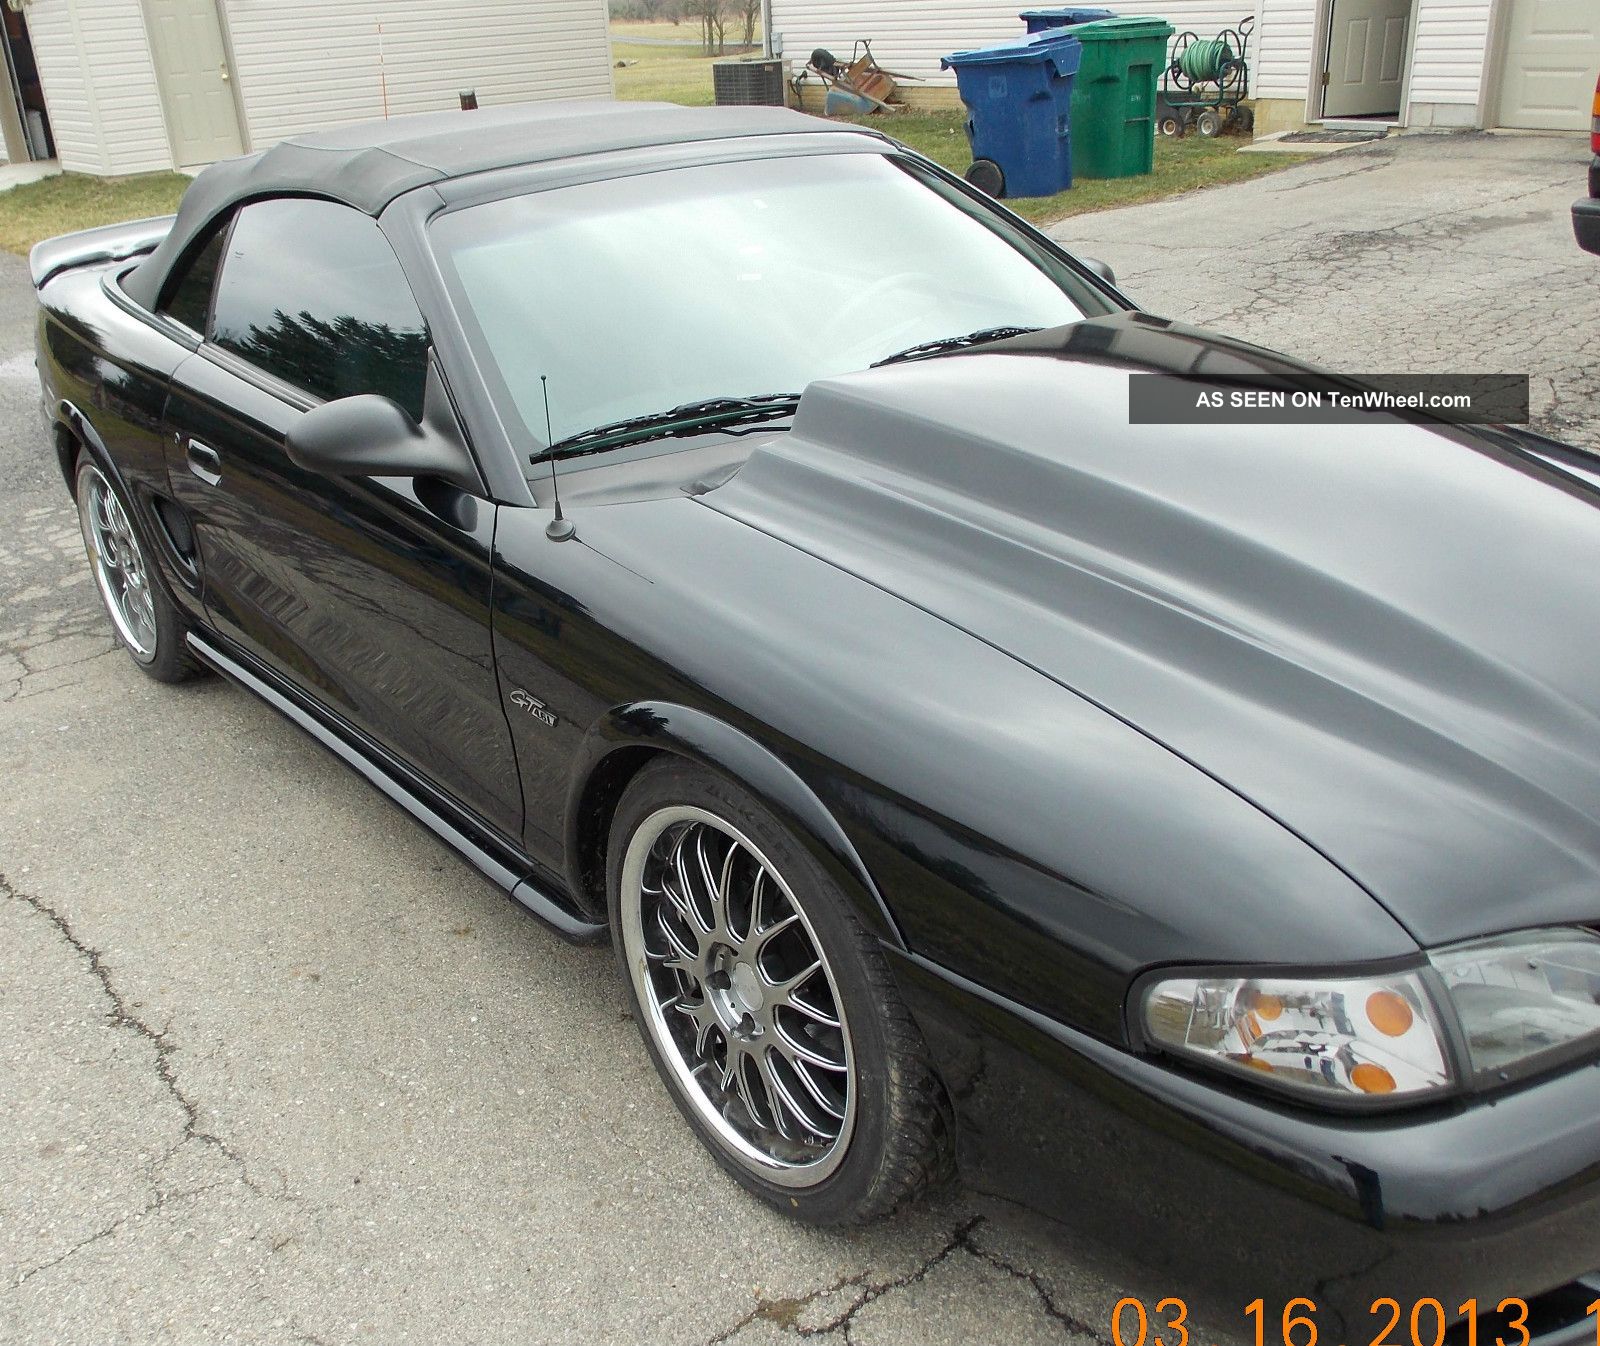 1997 Ford mustang gt 4.6 specs #3